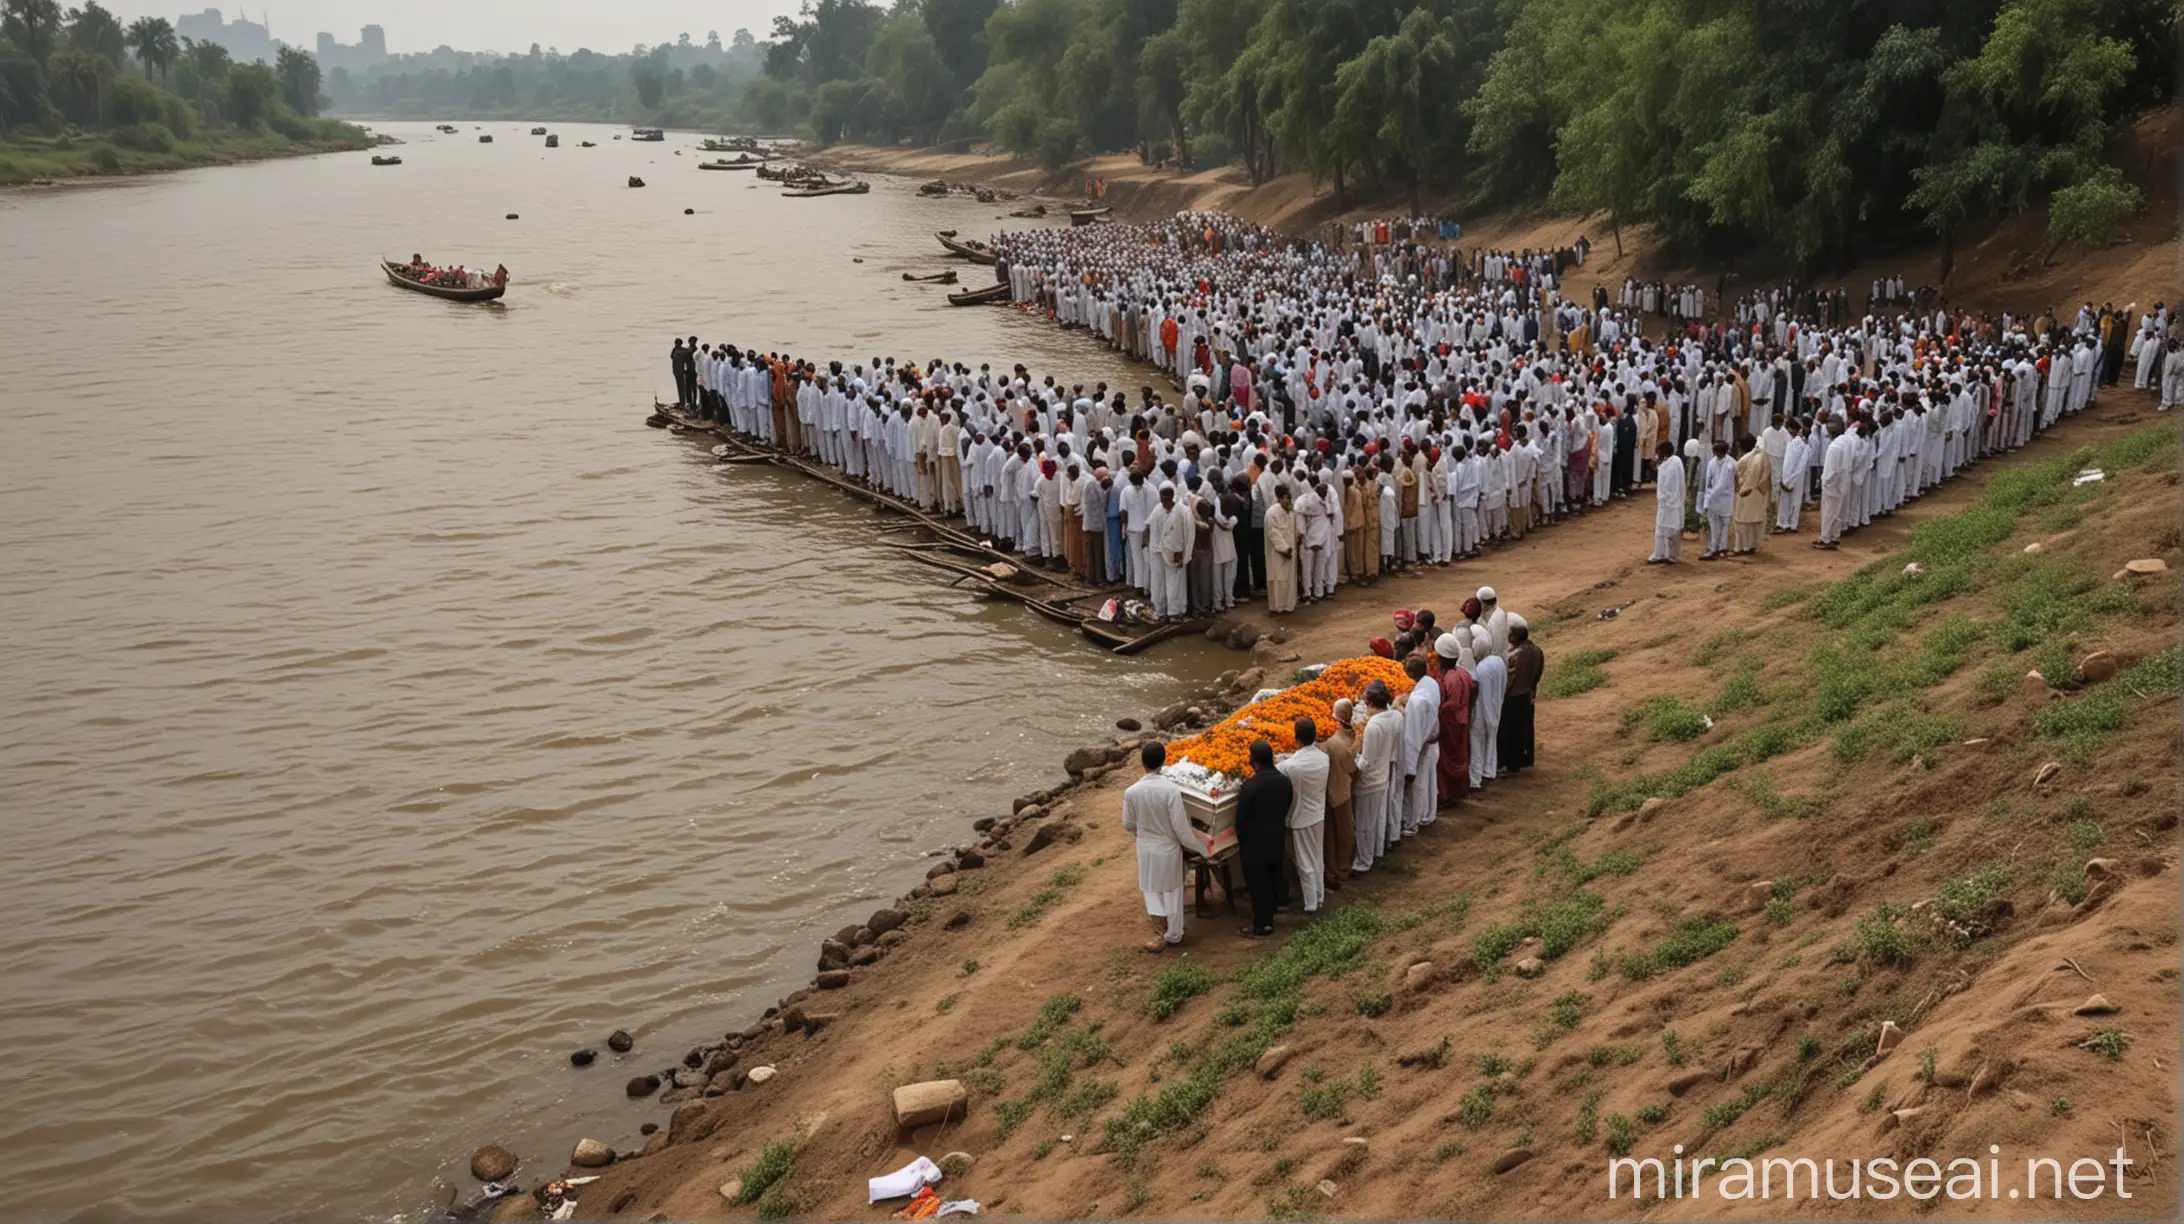 funeral in india near river bank